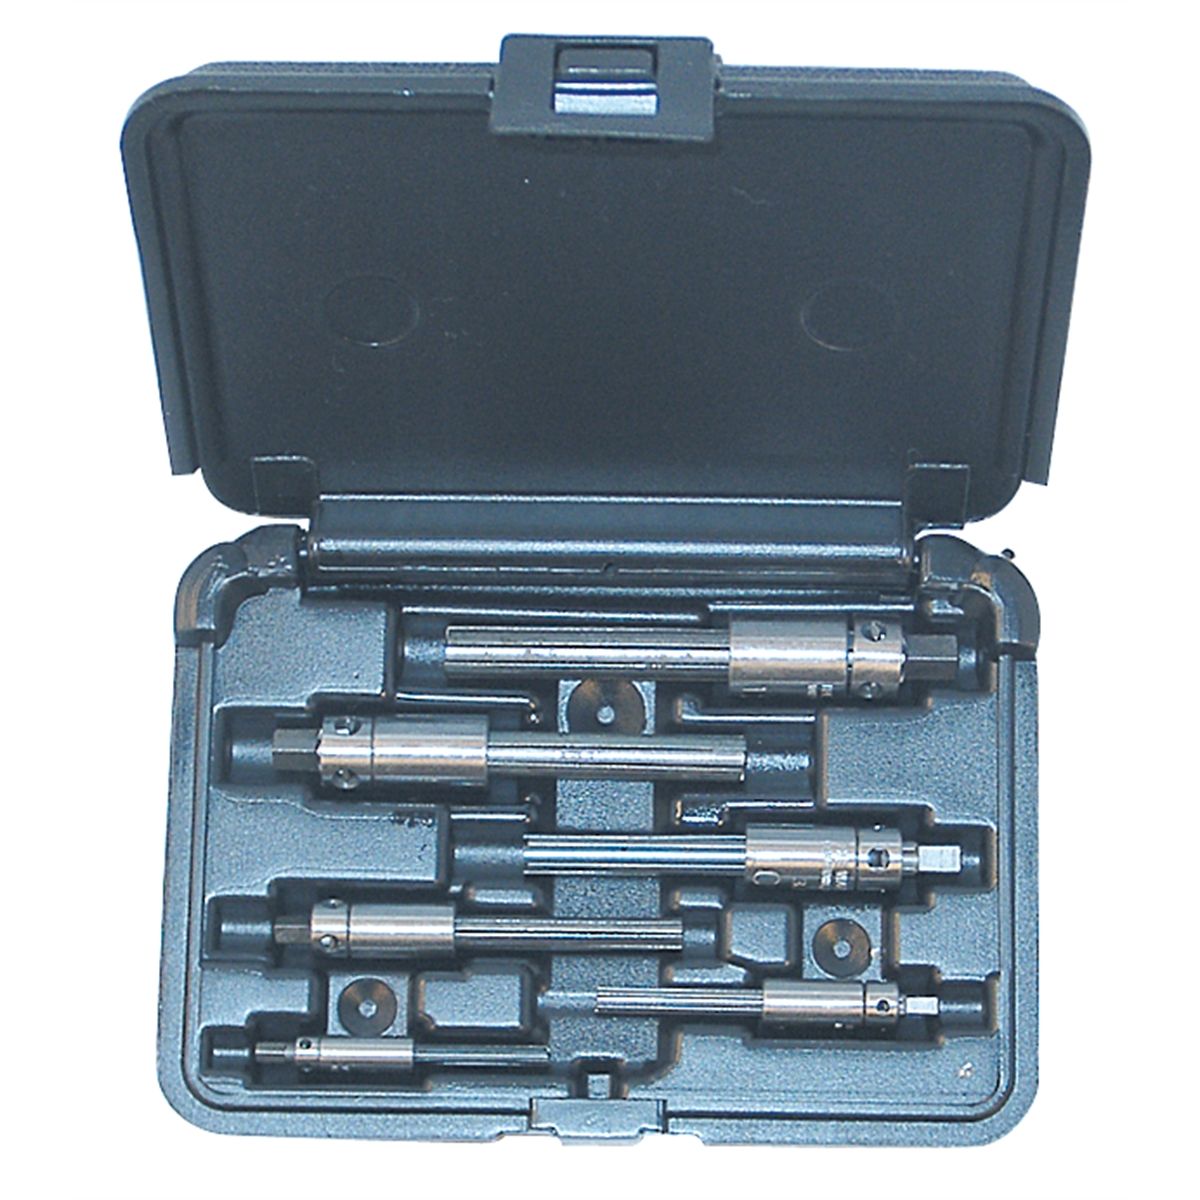 Walton 18001-2 6 Piece 2 Flute Tap Extractor Set with Square Shank